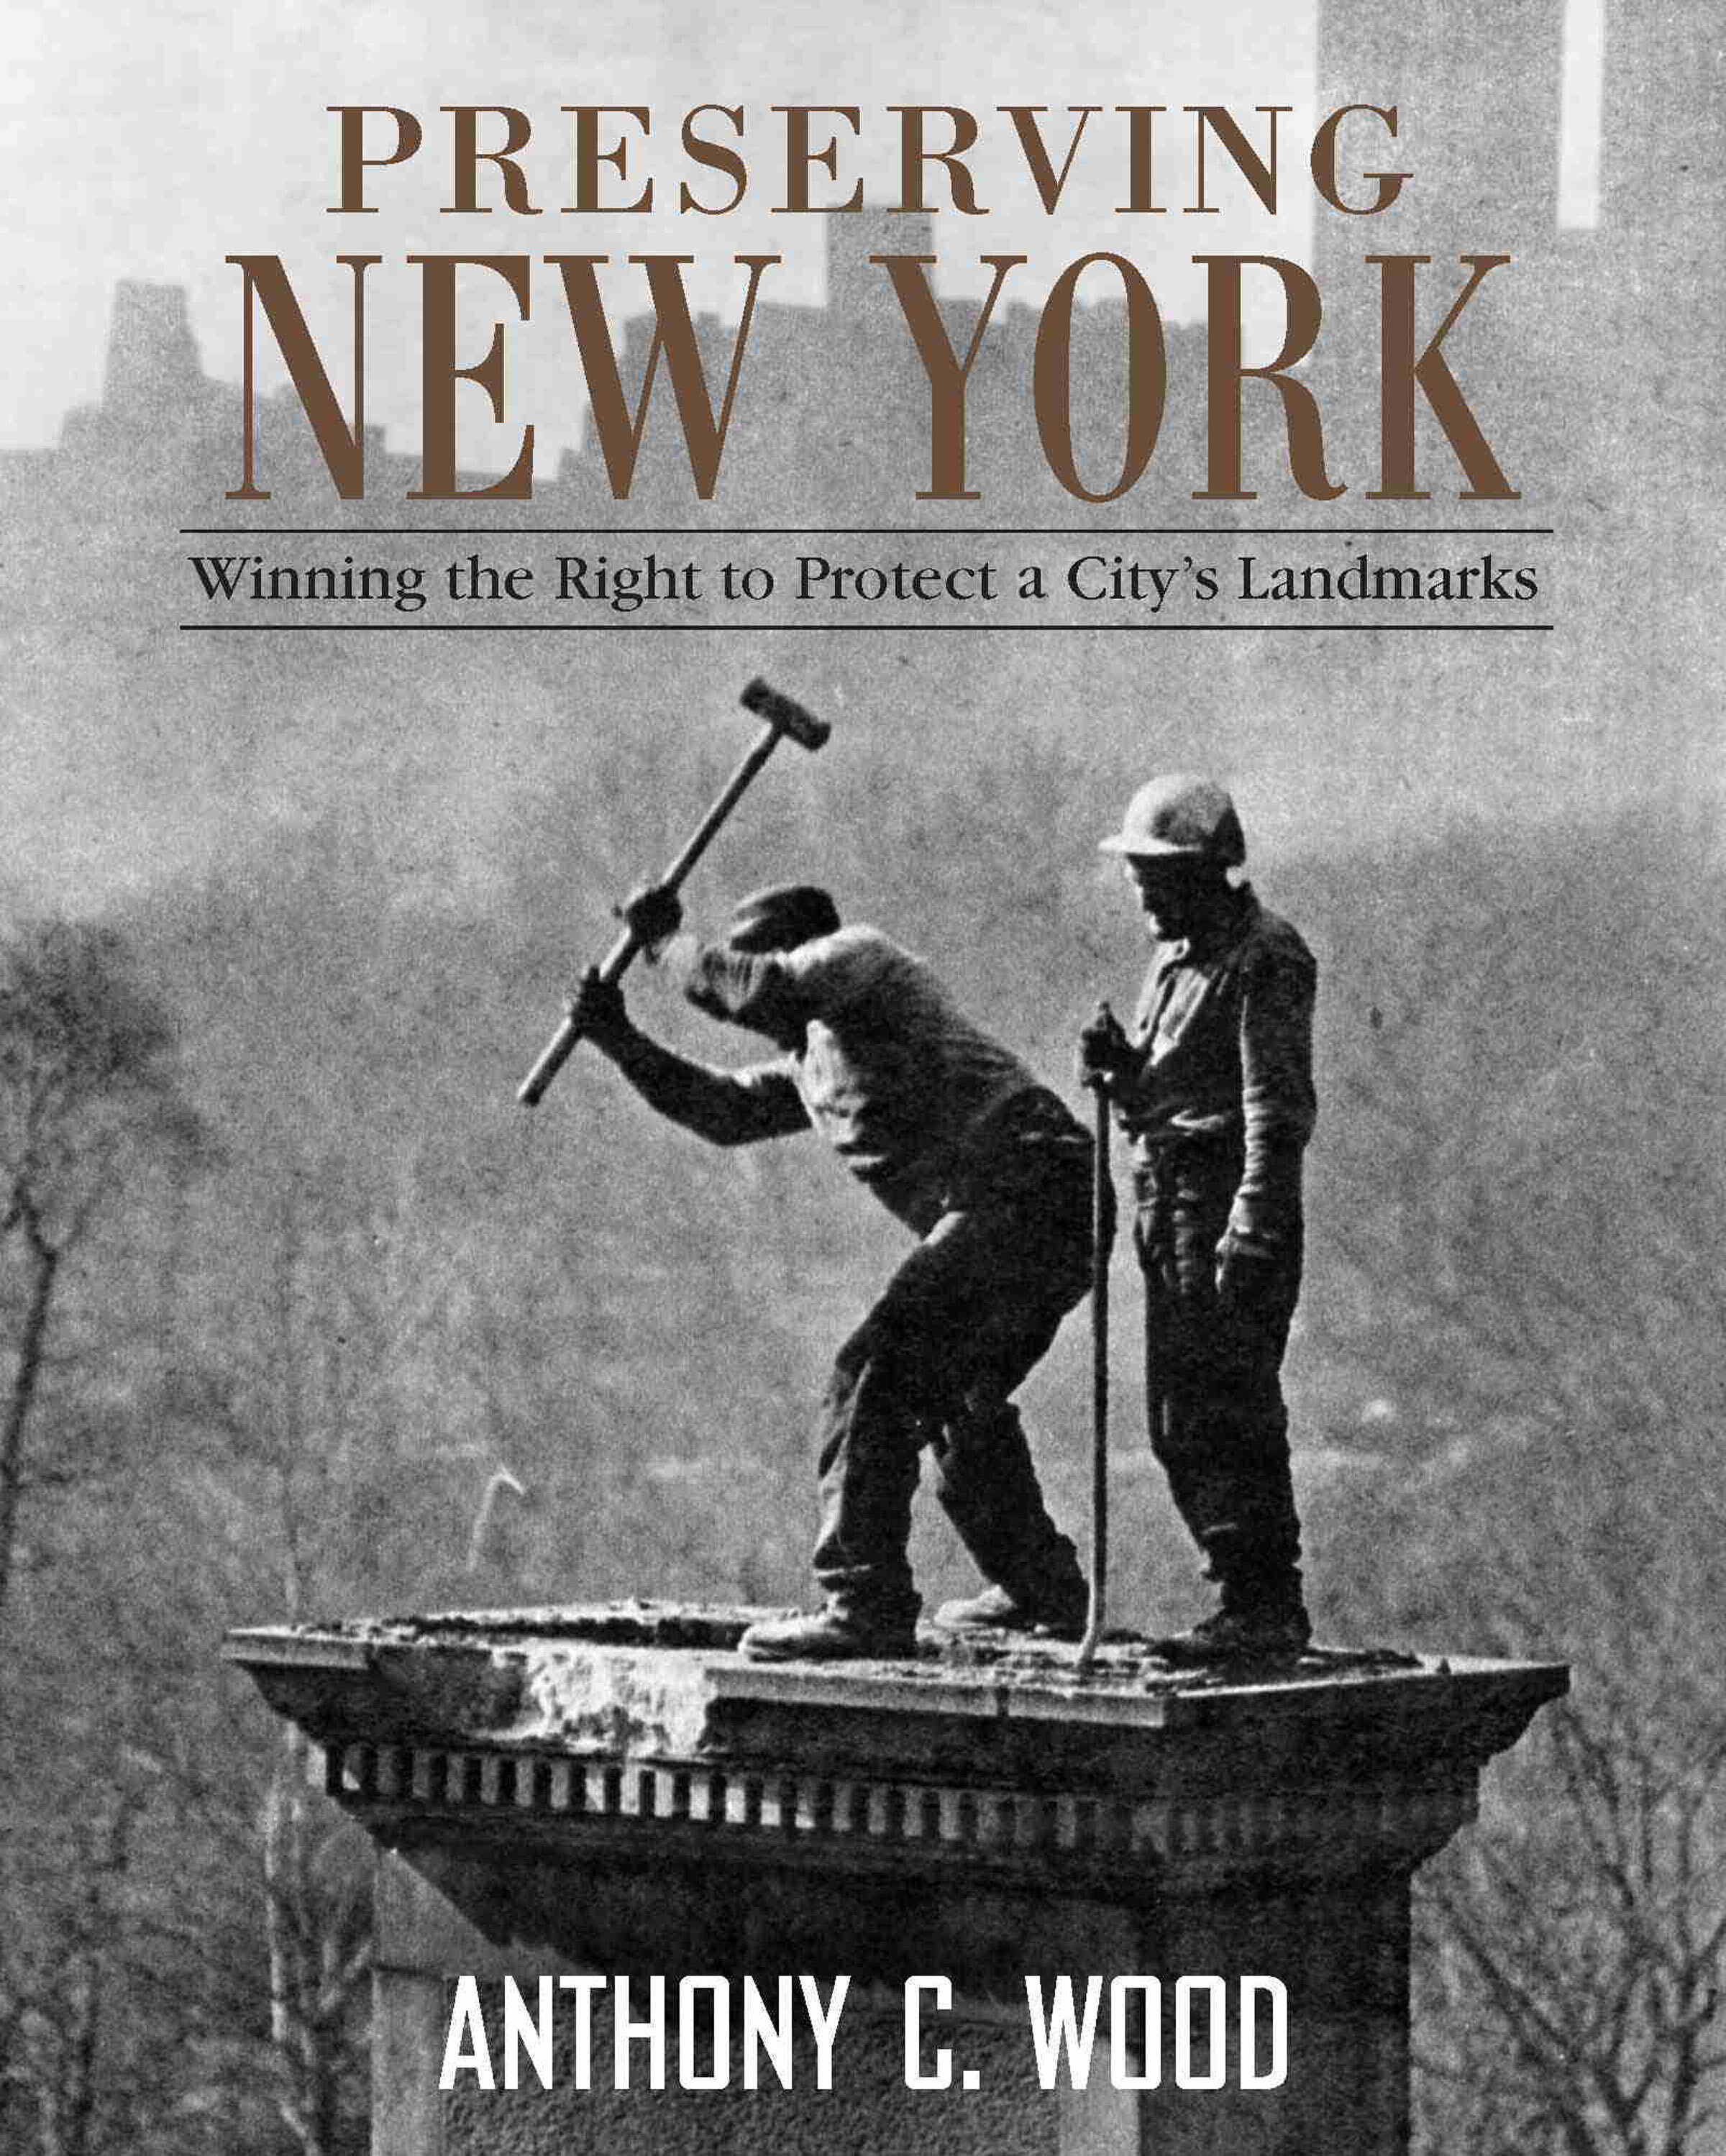 Preserving New York: Winning the Right to Protect a City’s Landmarks by Anthony C. Wood (Routledge, 2007) 